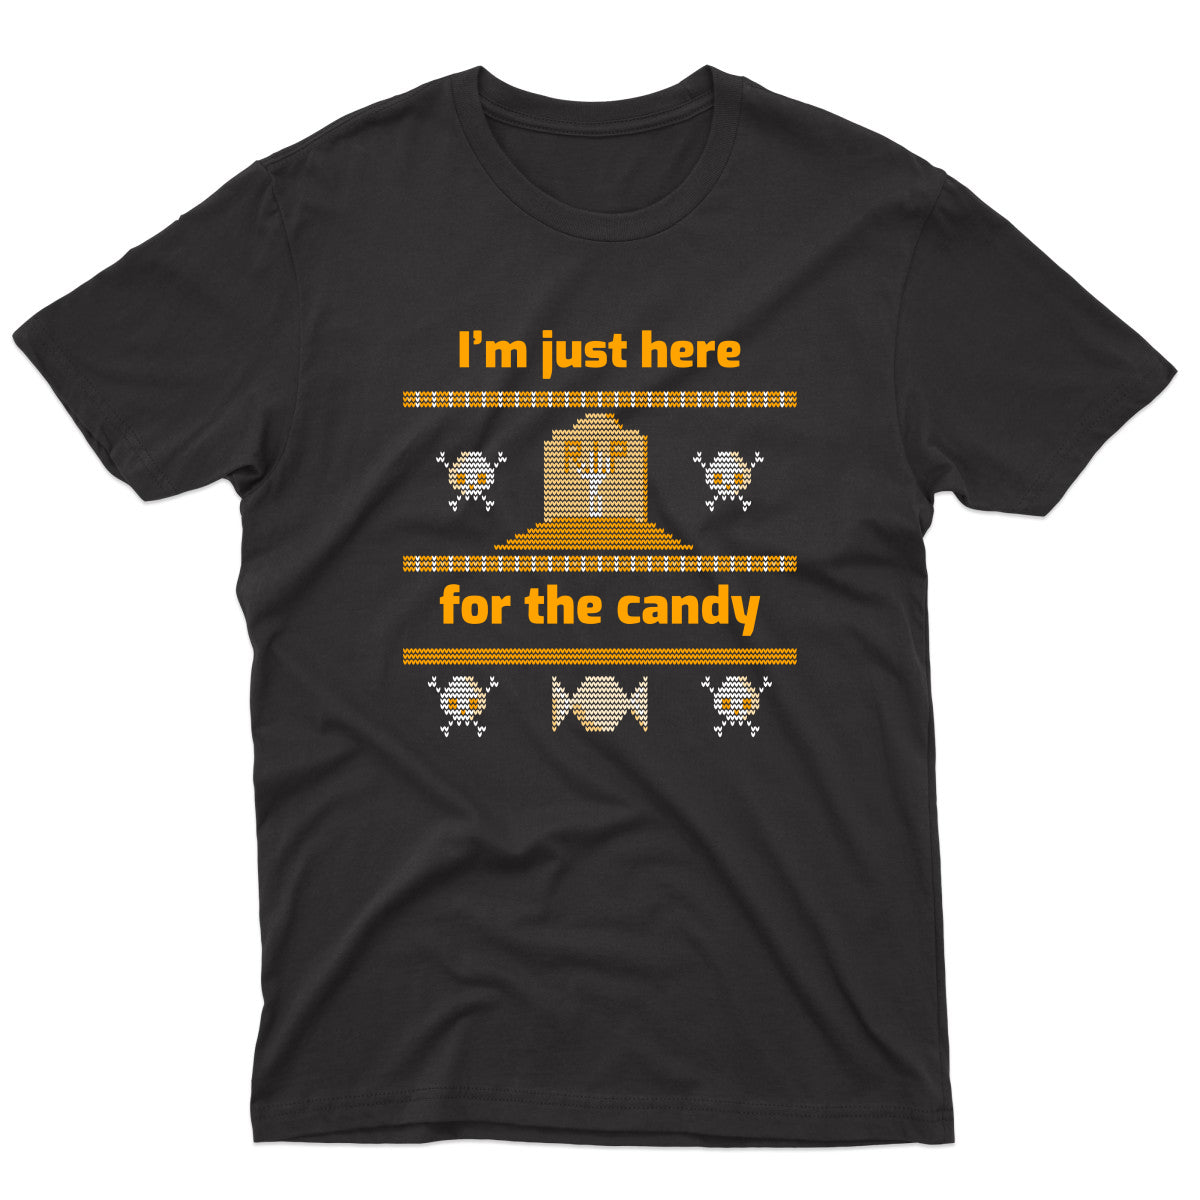 I'm Just Here For the Candy Men's T-shirt